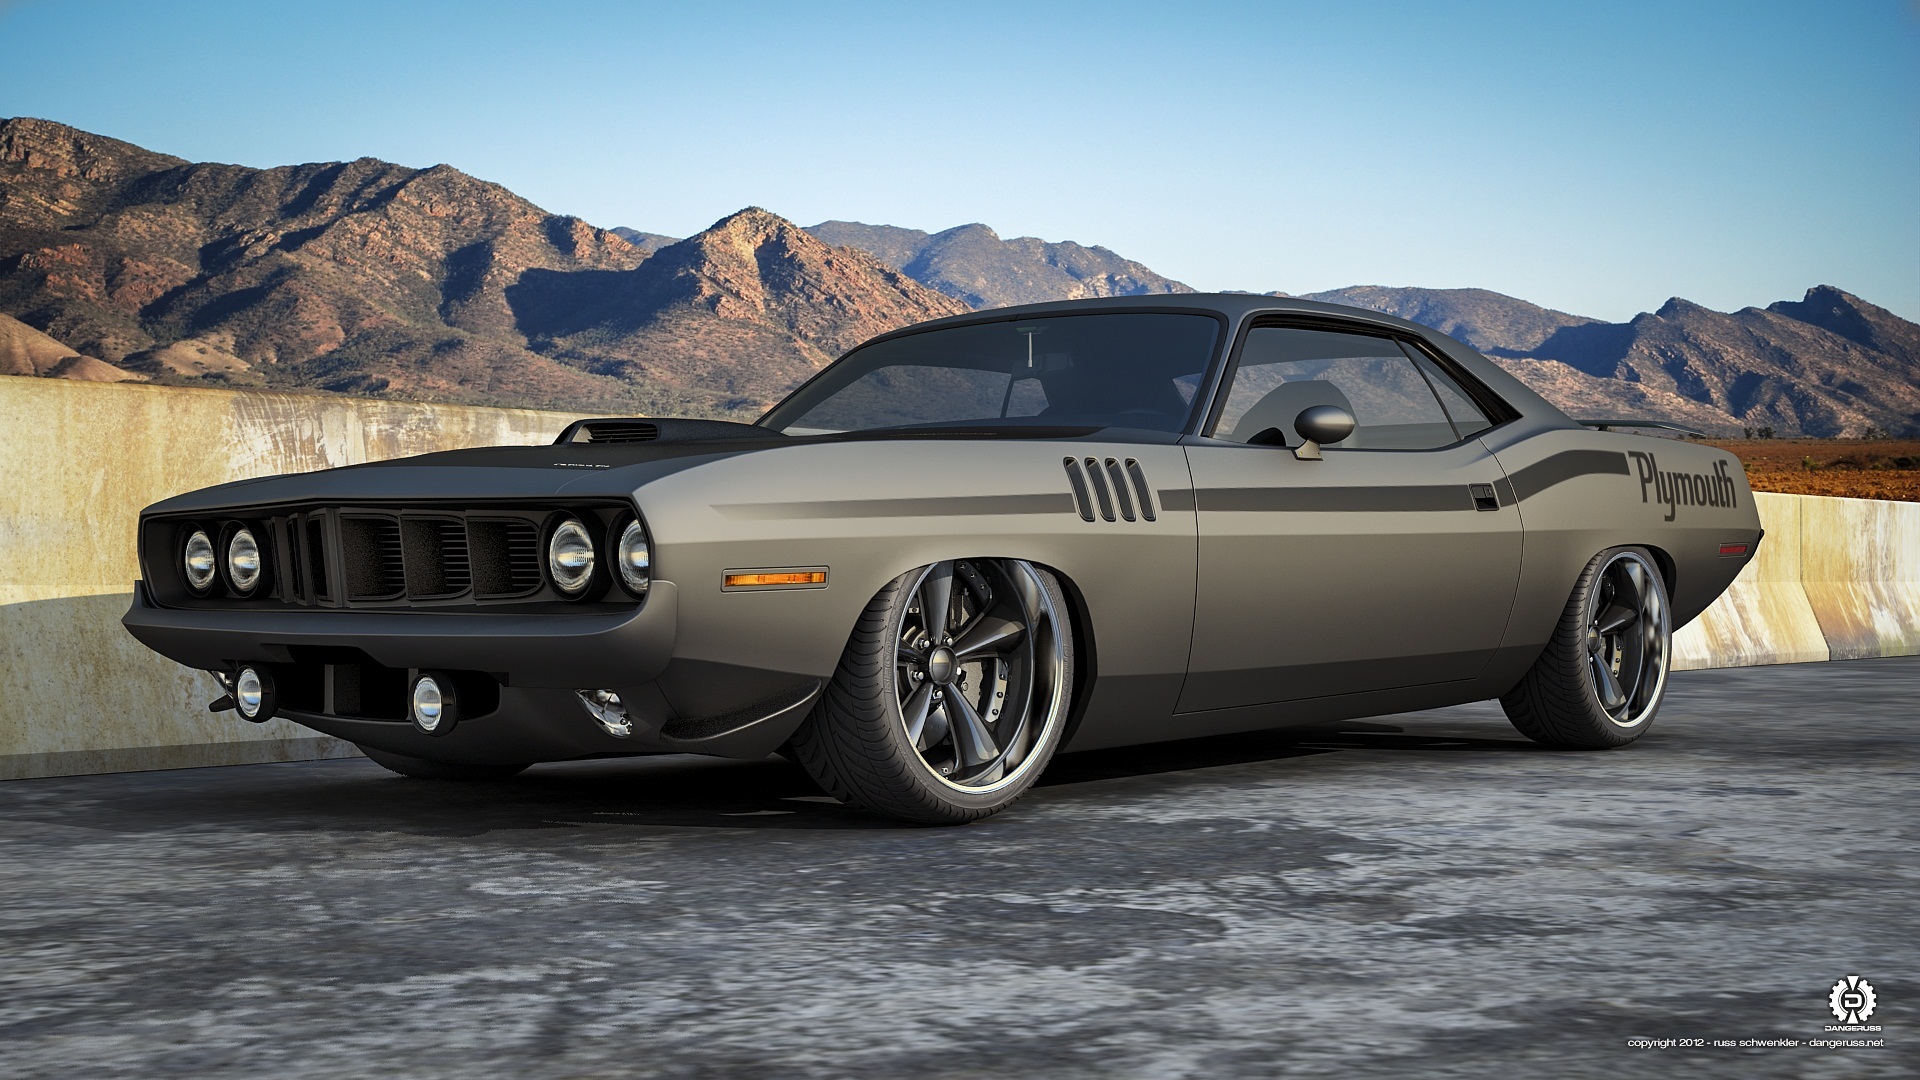 Muscle Car wallpapers, Vehicles, HQ Muscle Car pictures ...